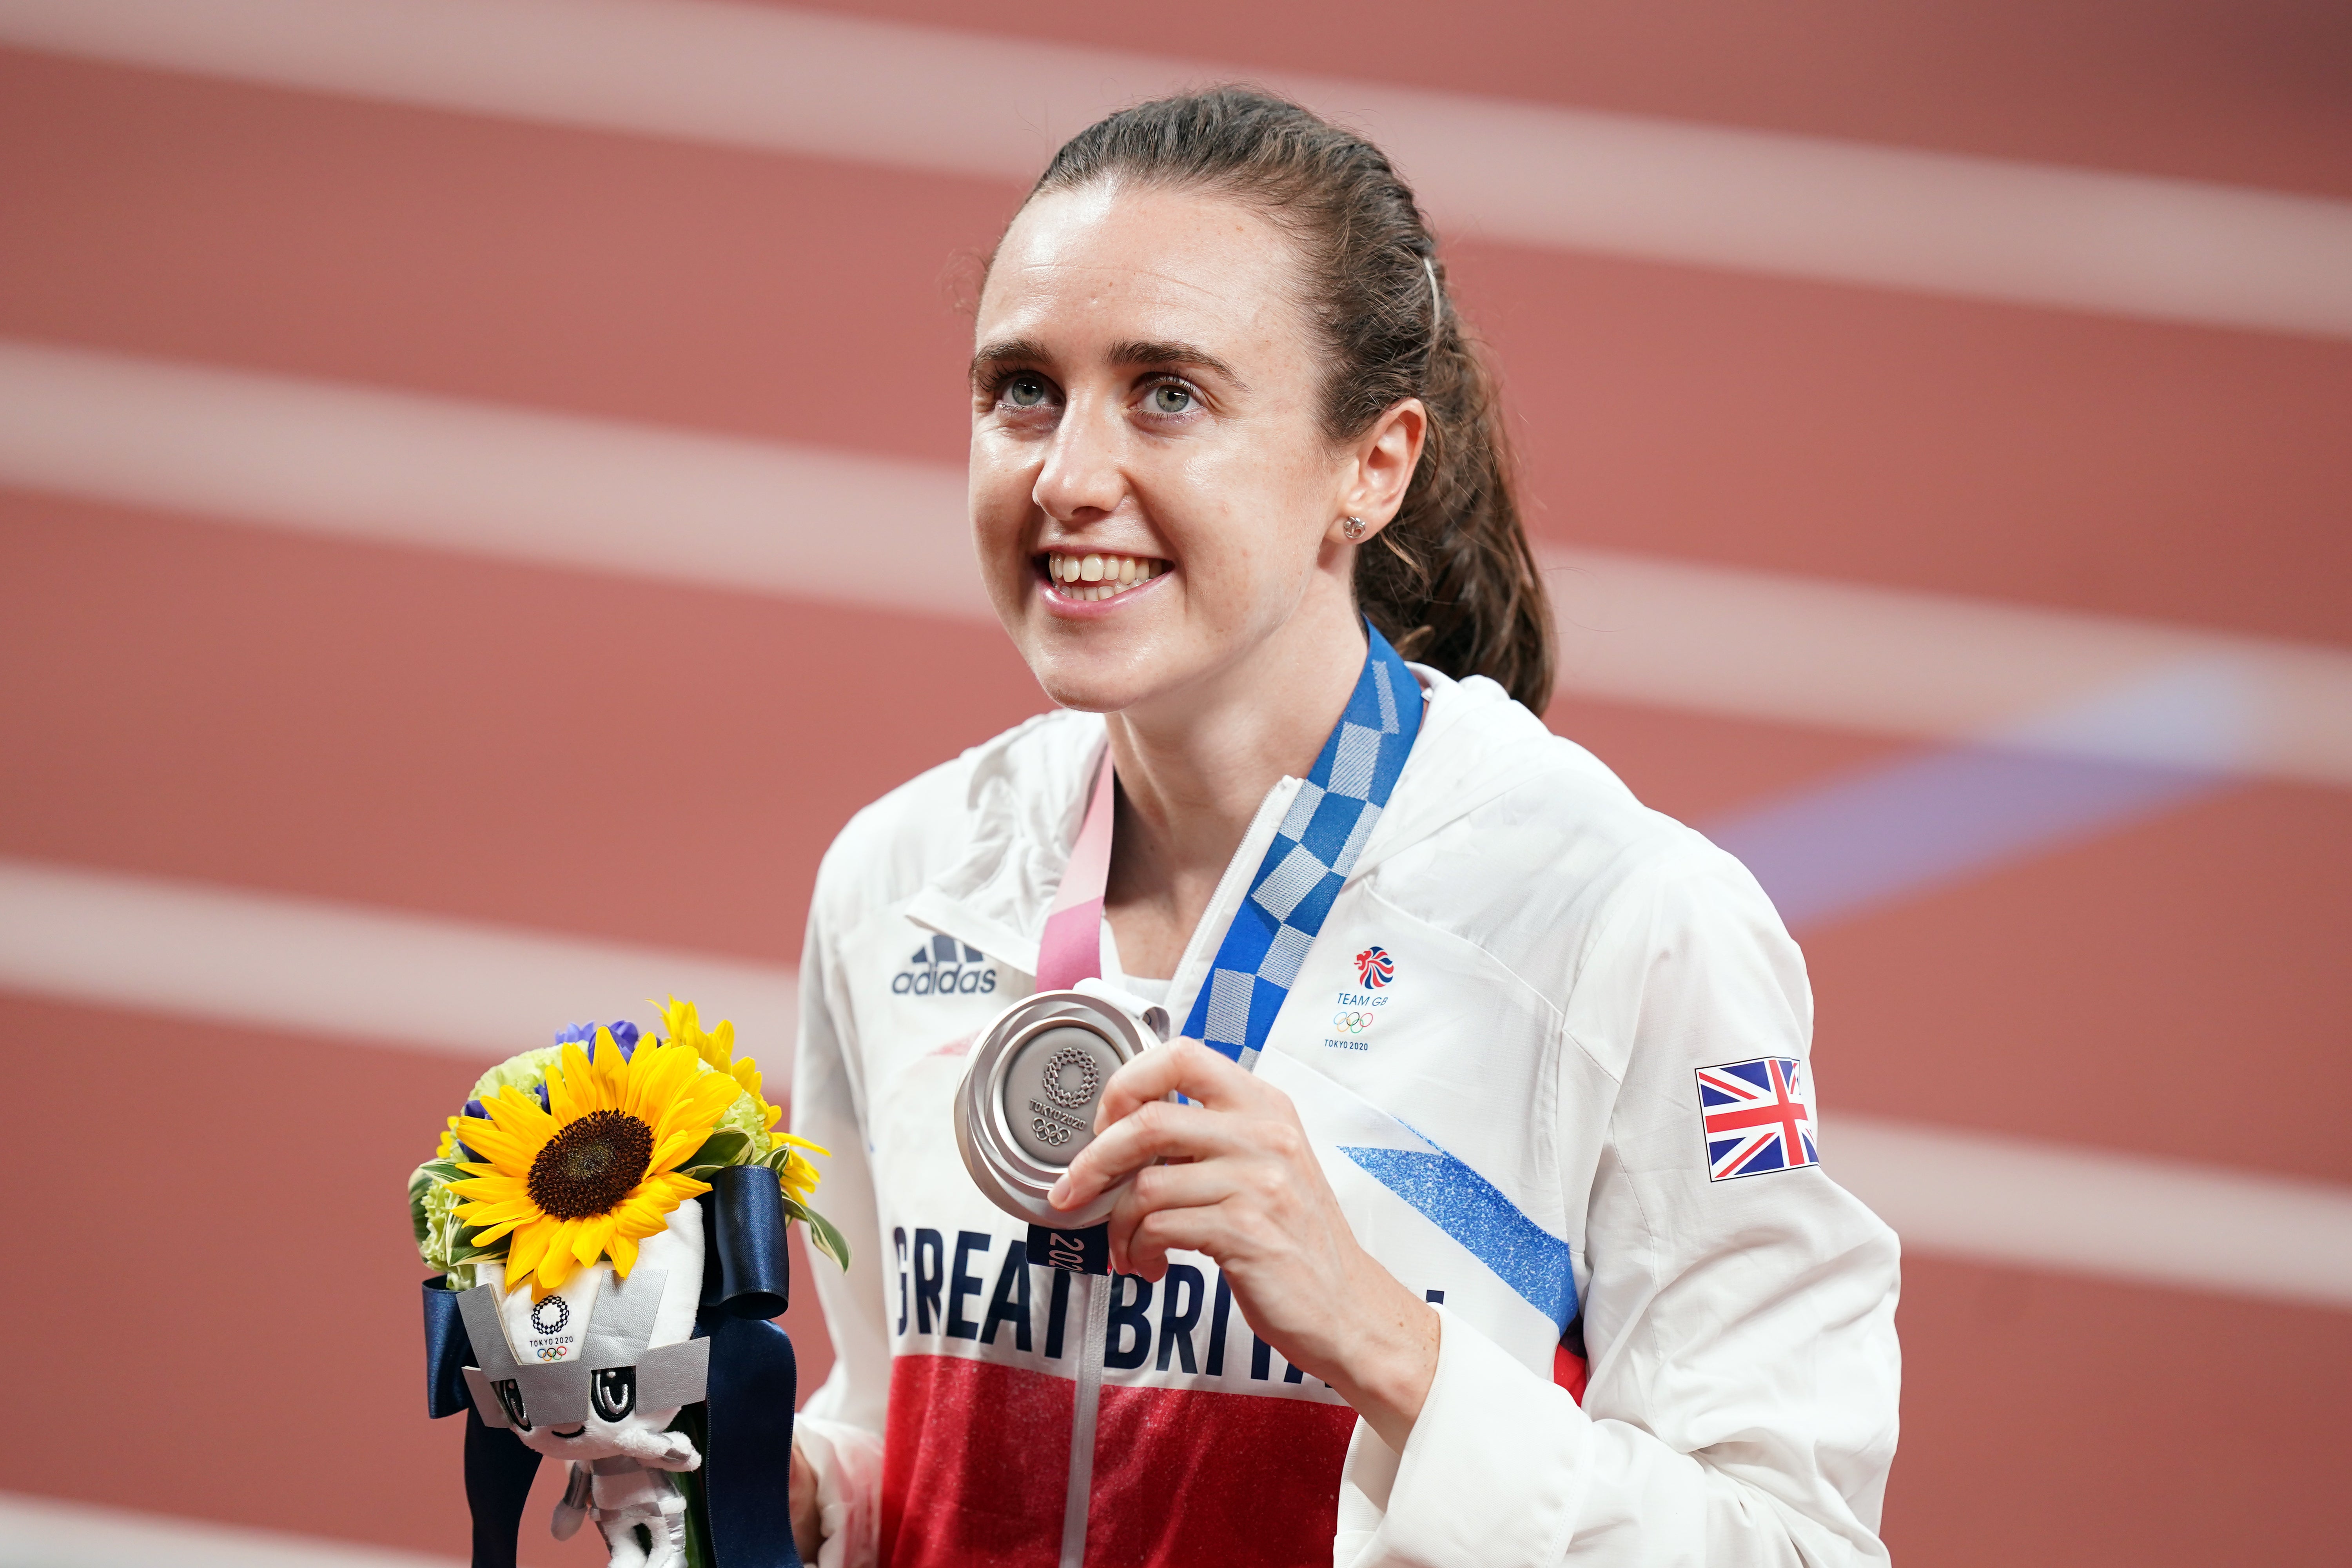 Laura Muir has set her sights on gold at Birmingham 2022 (Mike Egerton/PA)